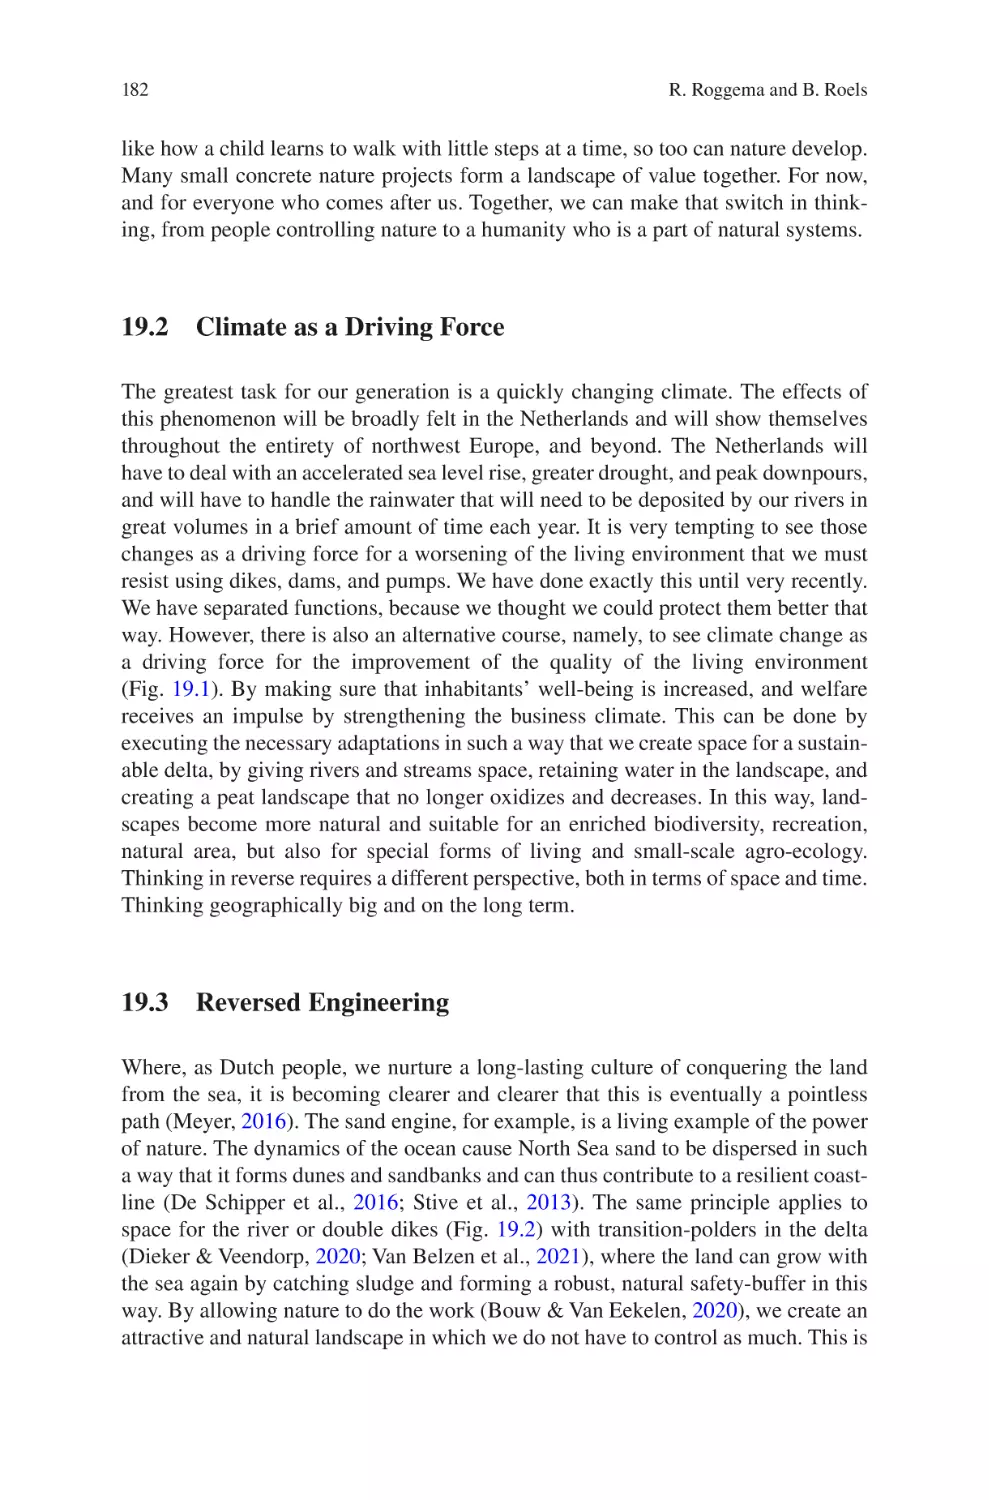 19.2 Climate as a Driving Force
19.3 Reversed Engineering